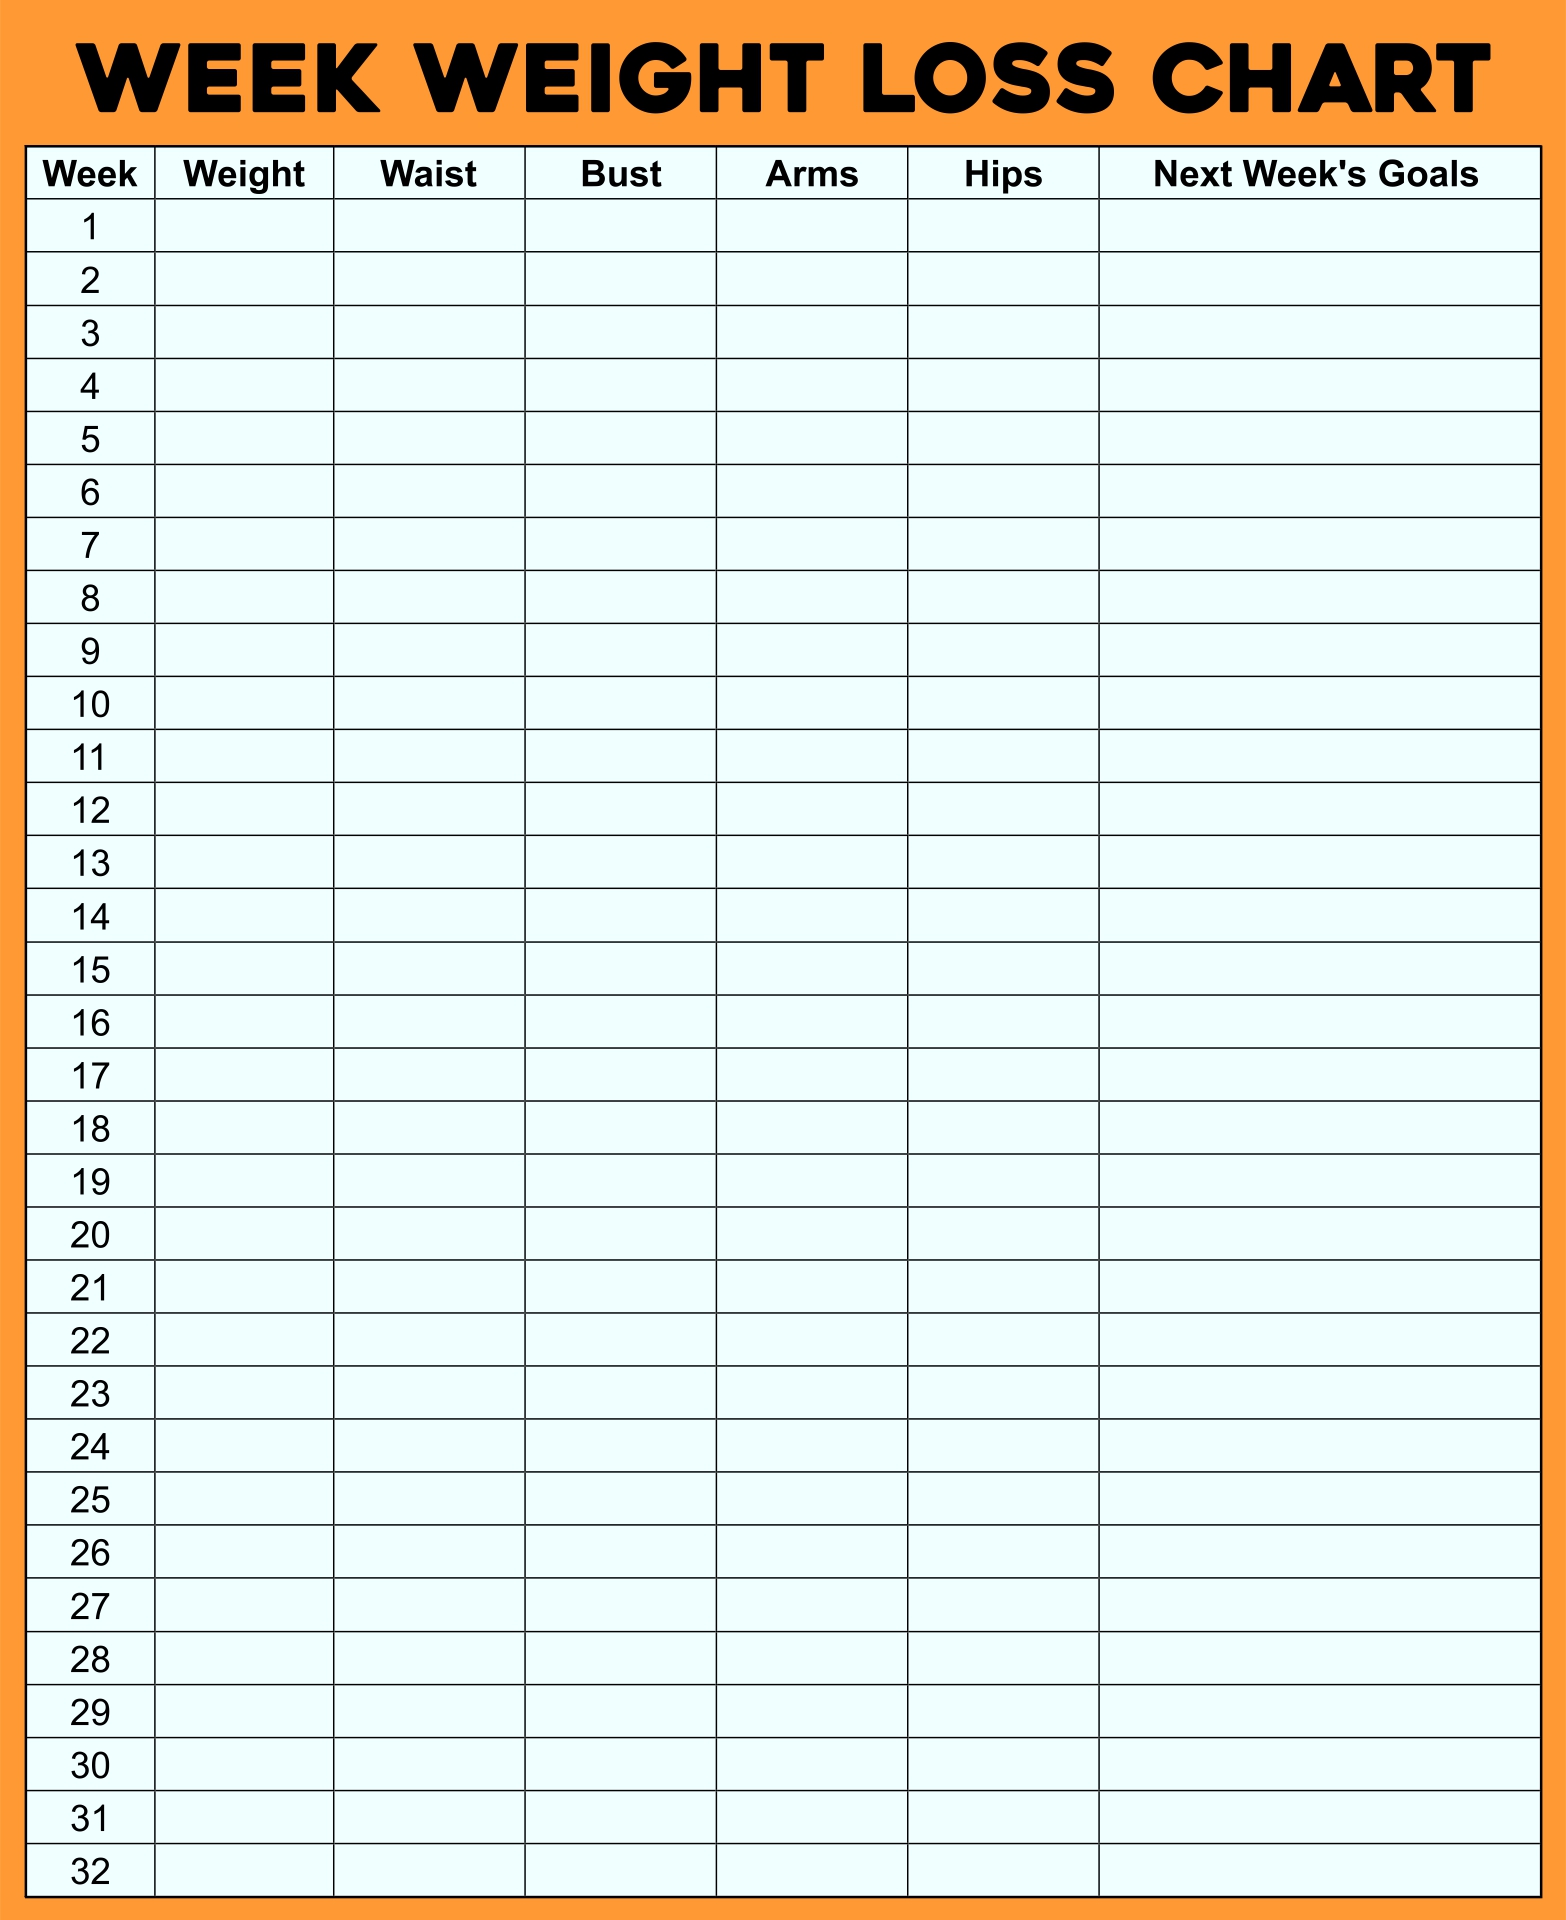 8-best-weight-loss-planner-printable-printableecom-7-best-week-chart-printable-weight-loss